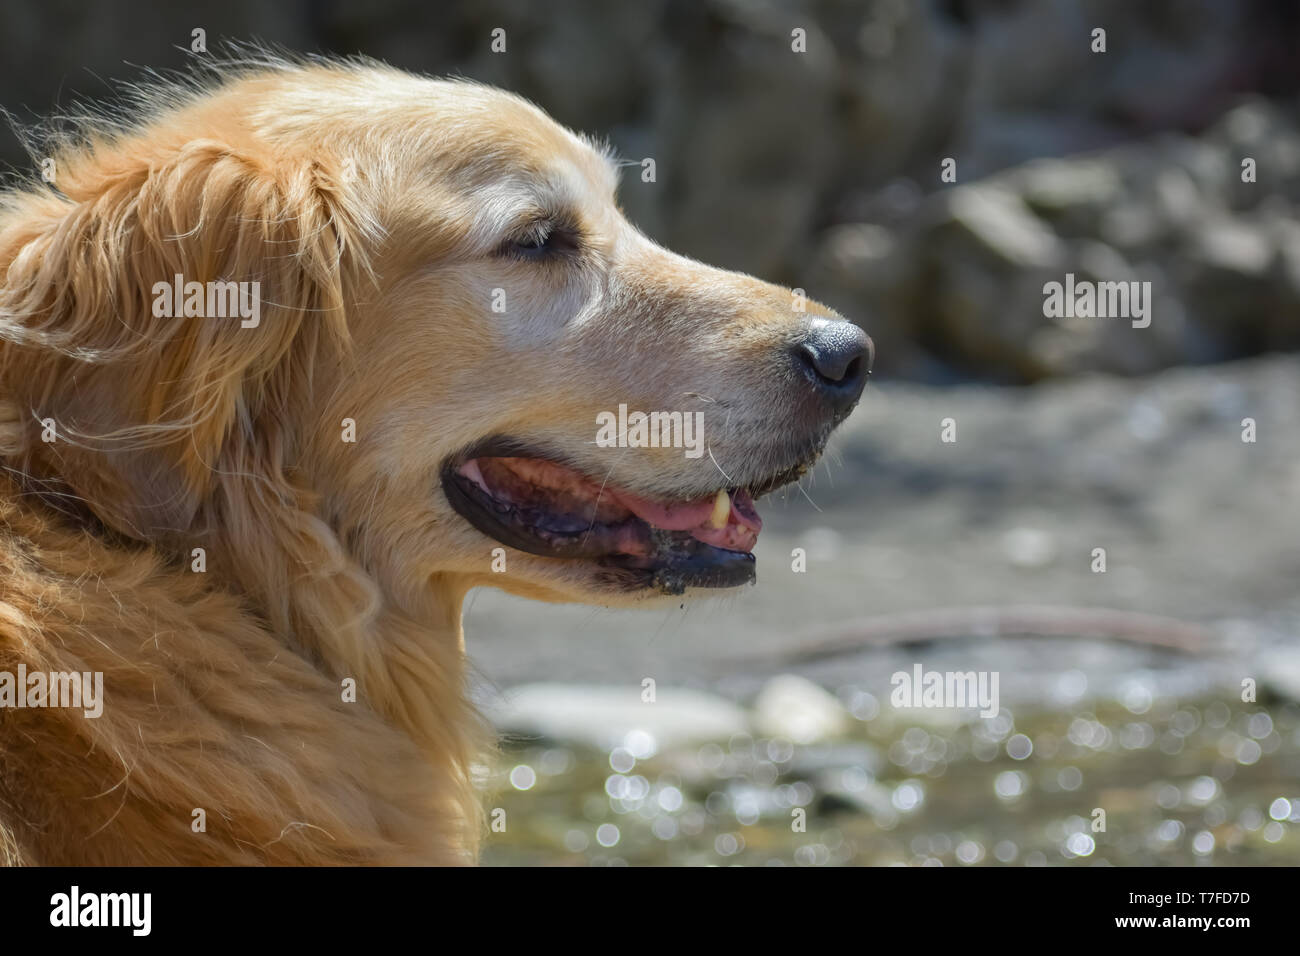 Close-up portrait of a smiling older Golden Retriever dog happily enjoying a sunny day on a beach near the water. Stock Photo